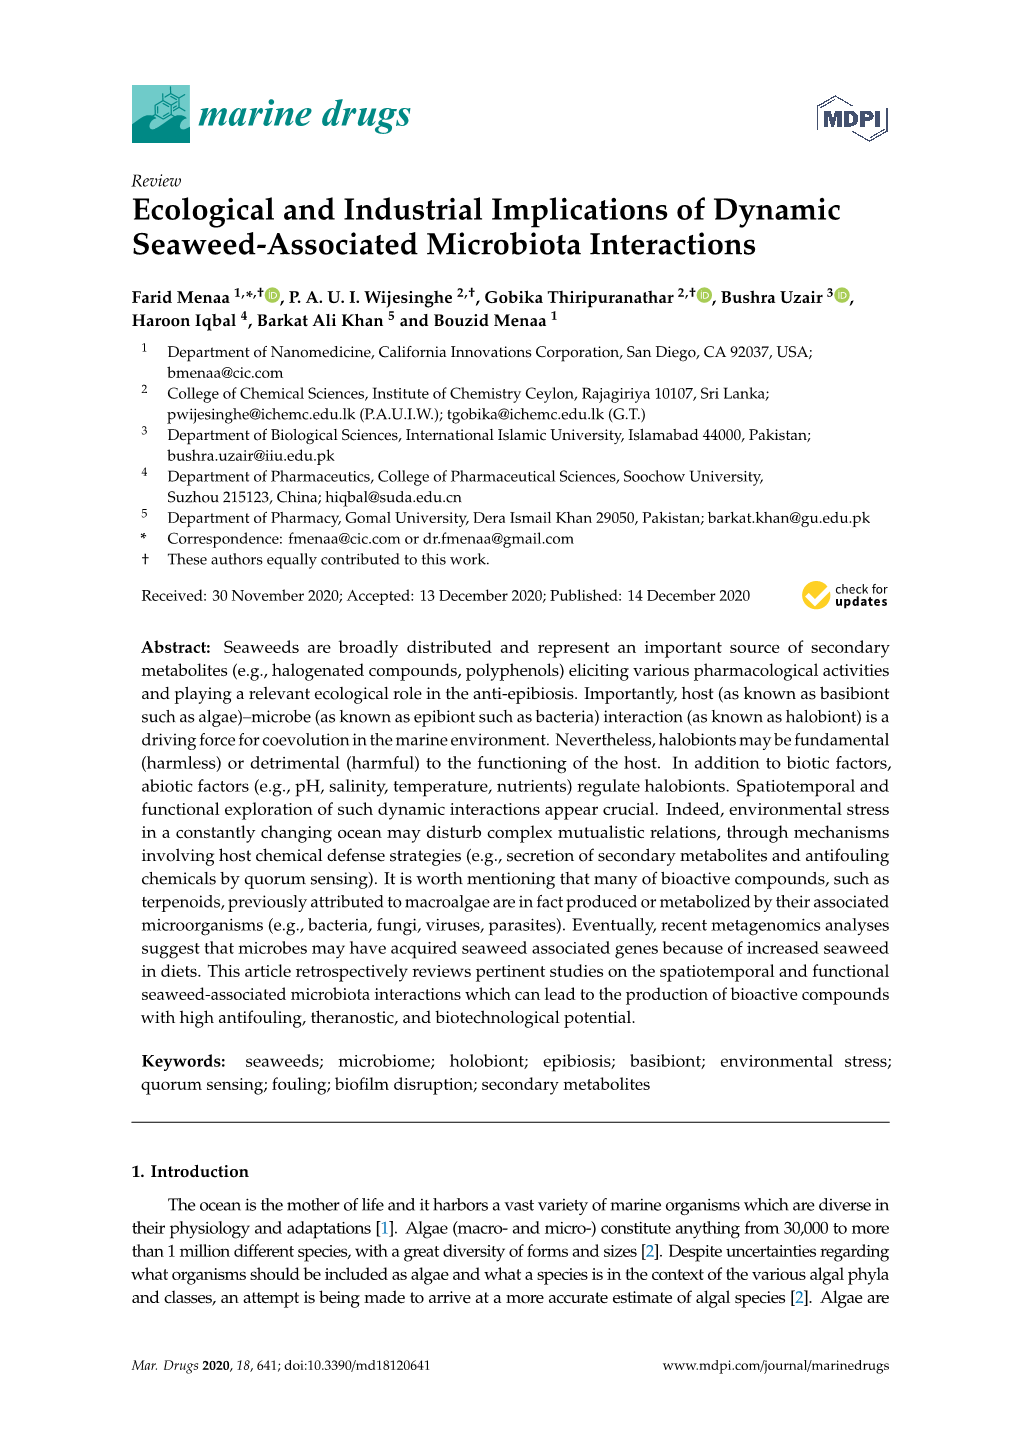 Ecological and Industrial Implications of Dynamic Seaweed-Associated Microbiota Interactions